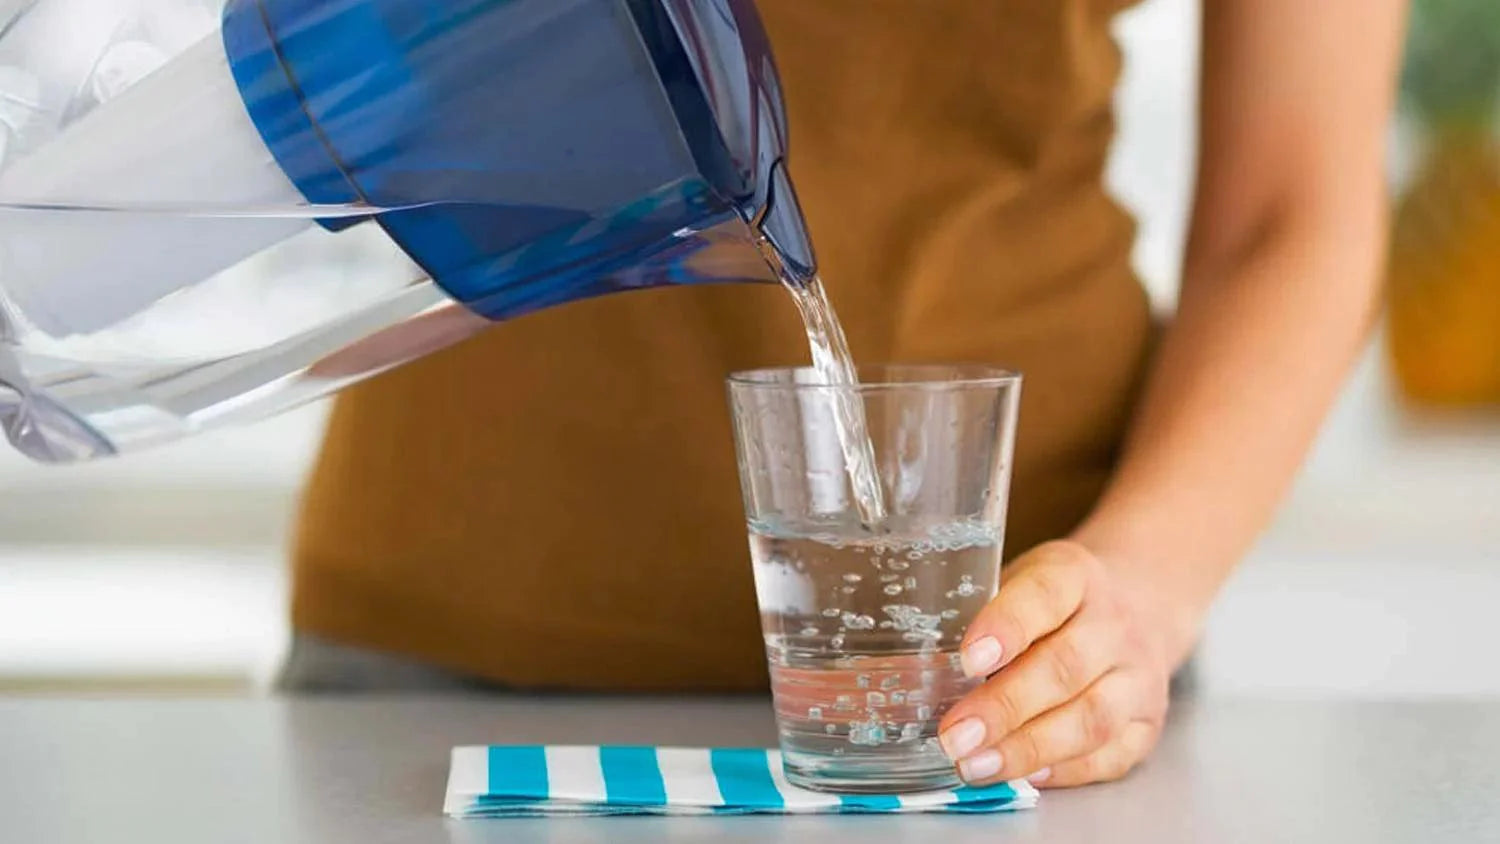 Everything Your Brita Filter Isn't Doing (That You Assumed It Does) - The Goodfor Company